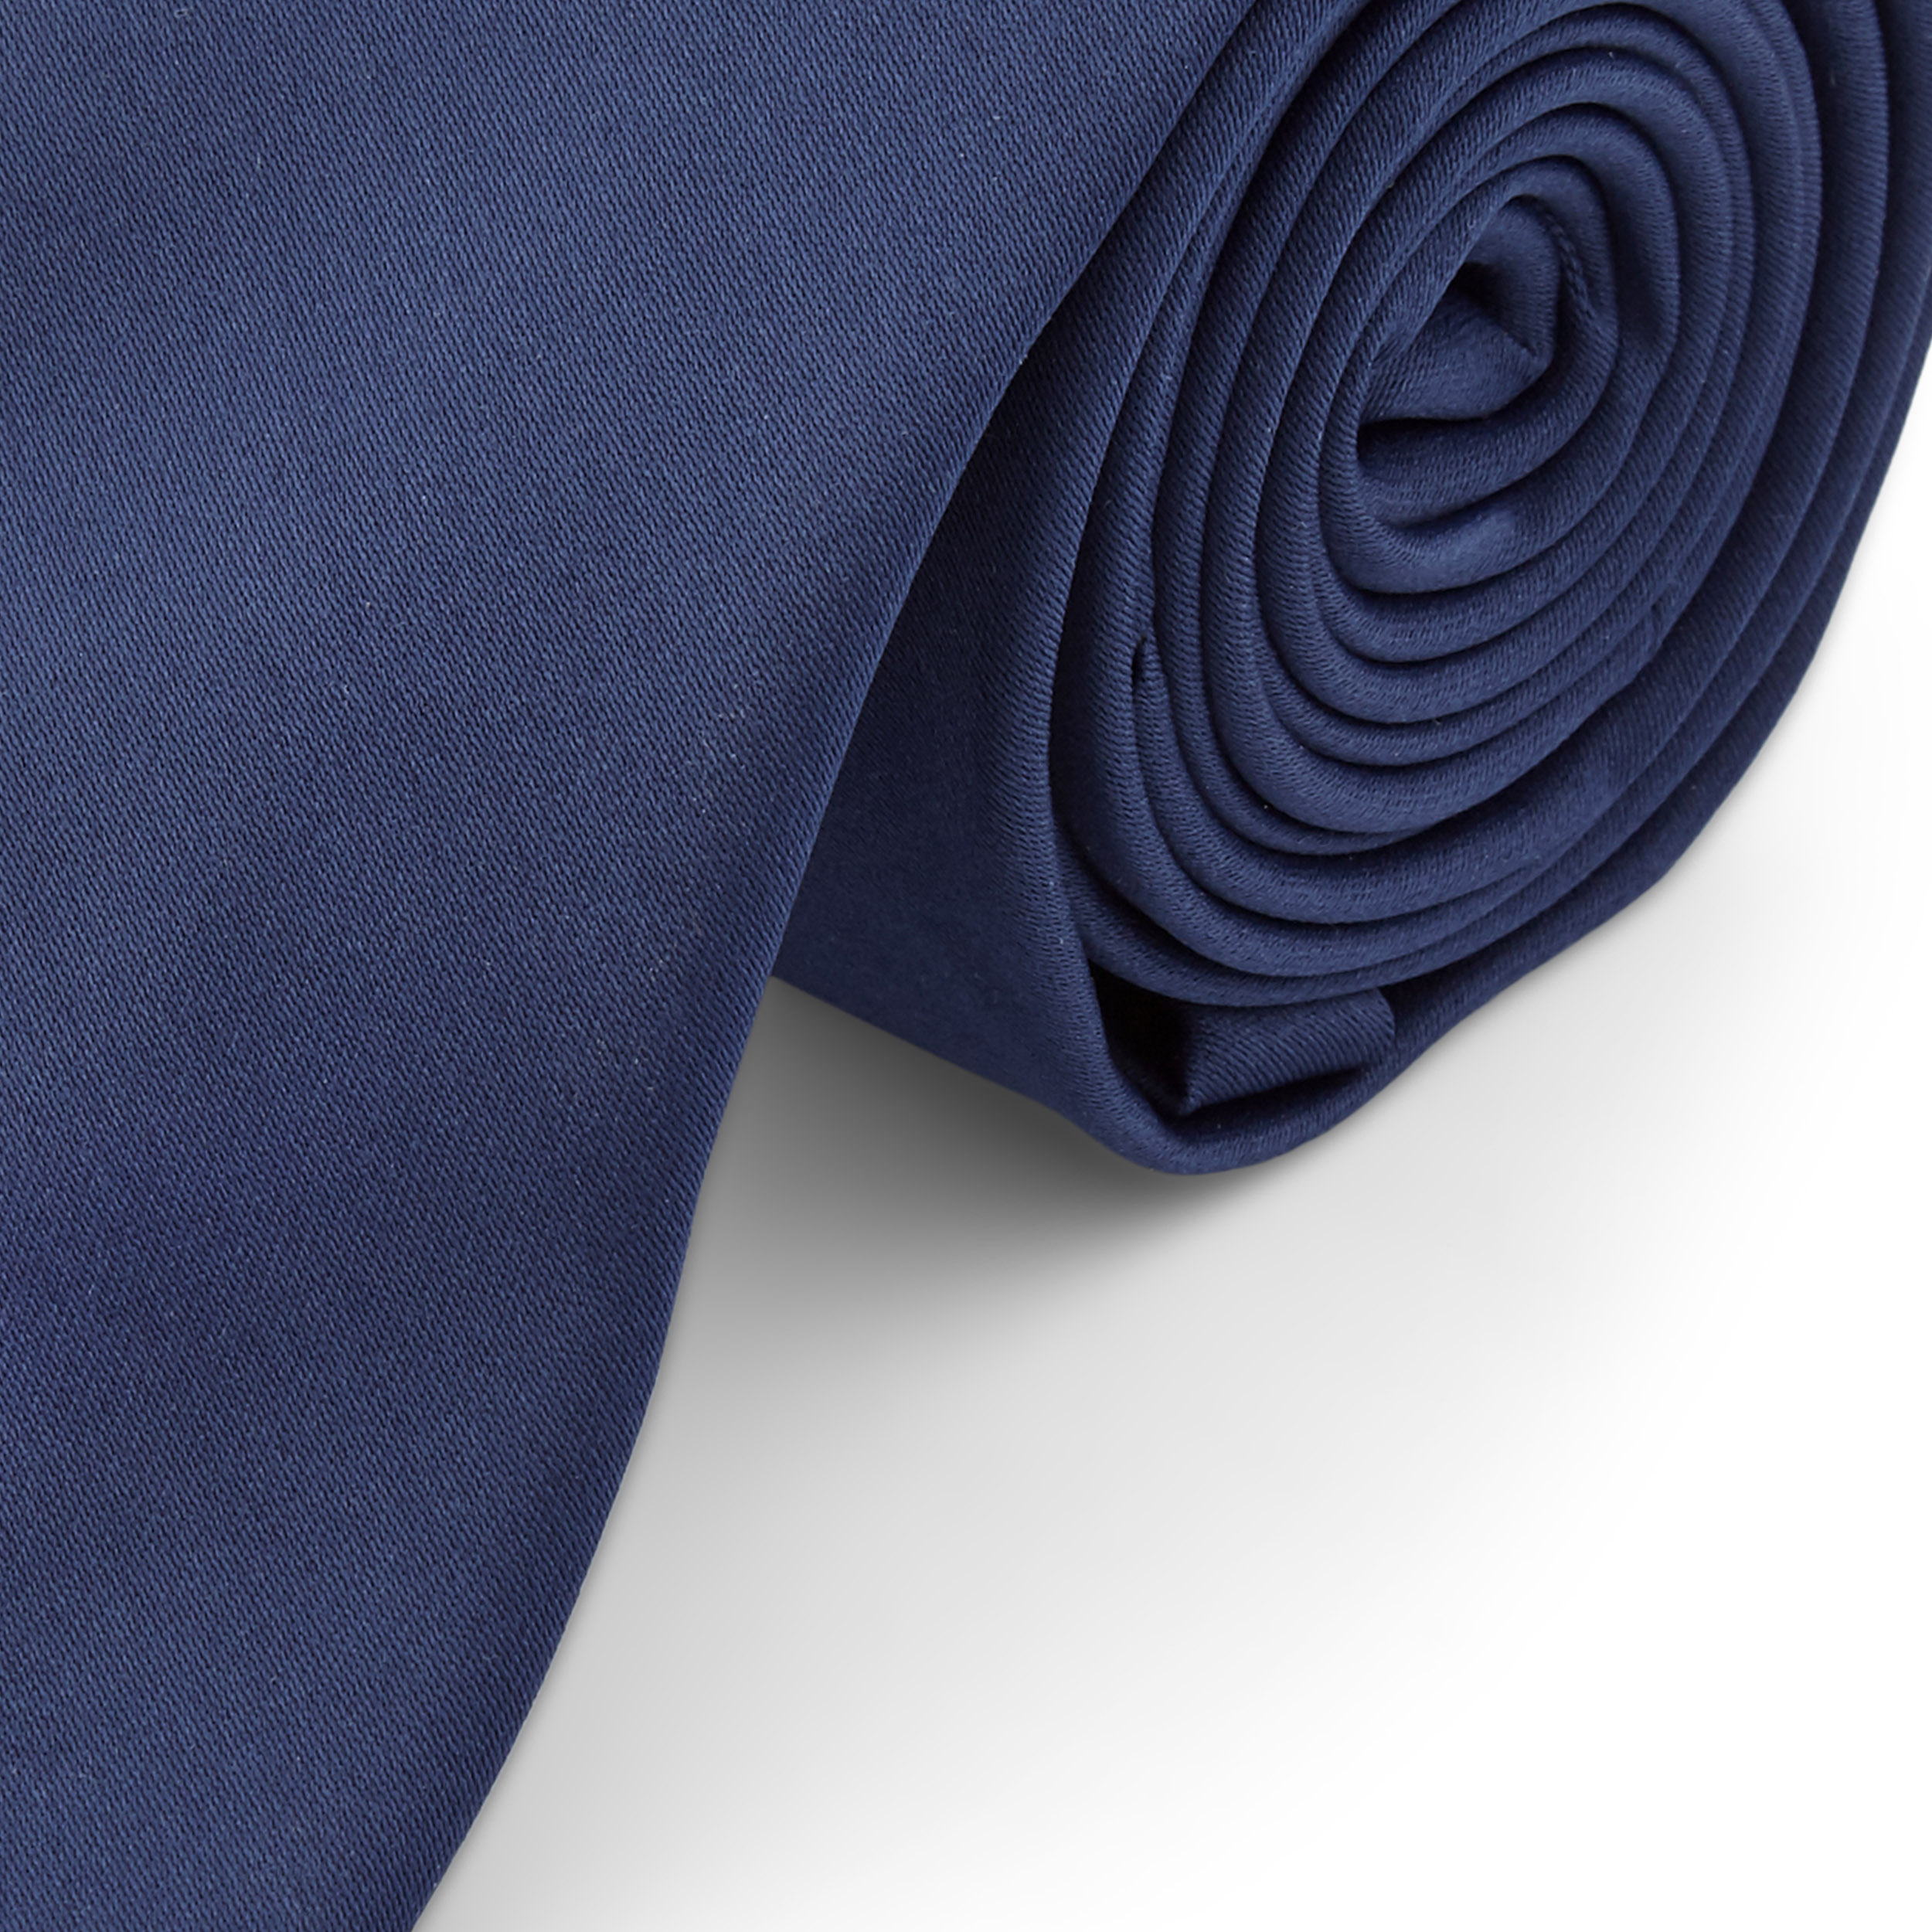 Classic Navy Blue Lined Polyester Tie